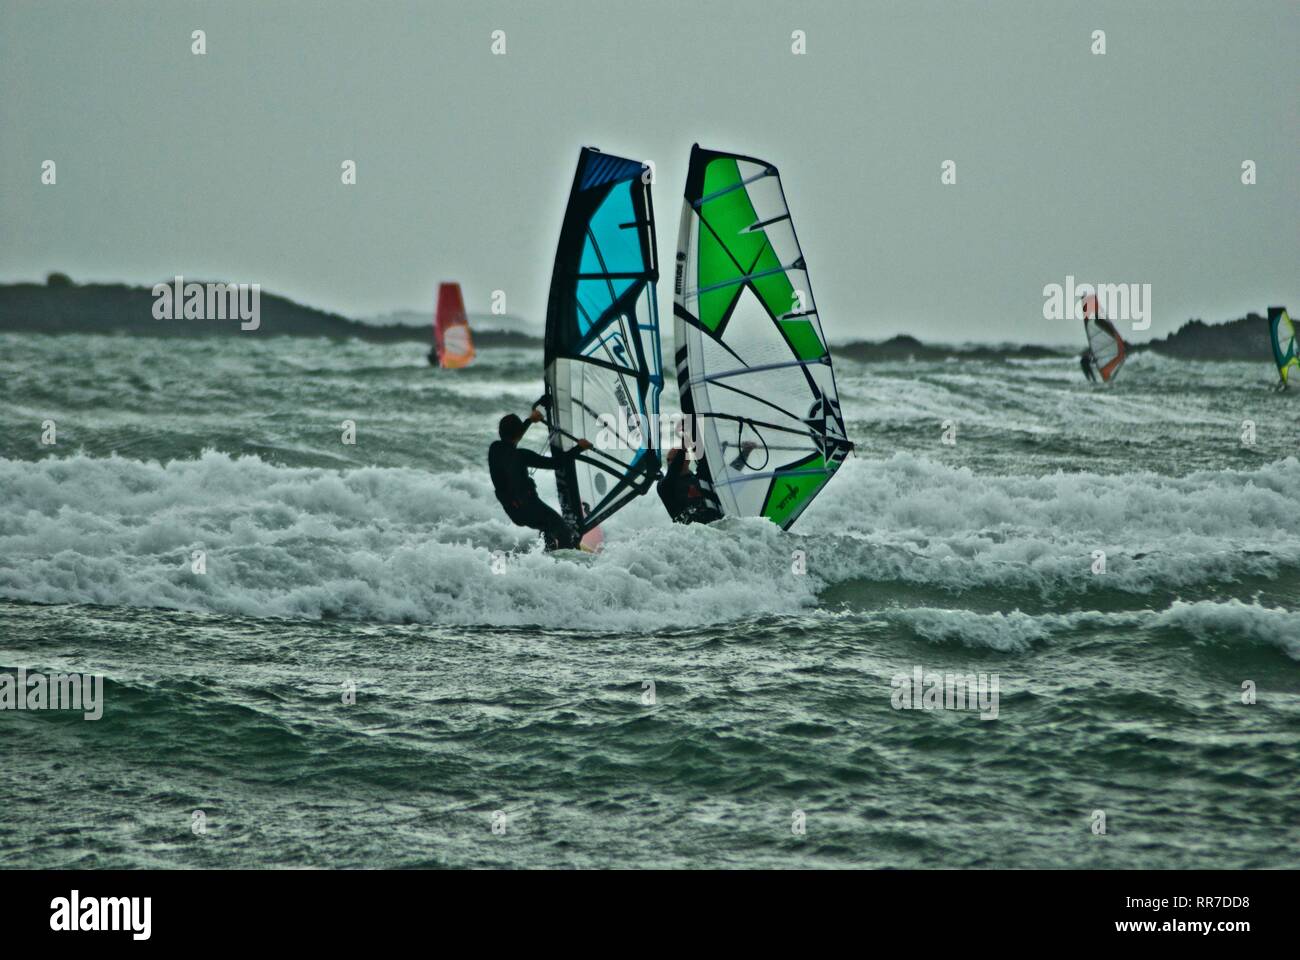 Wind surfers sail on dramatic white water in grey overcast weather in Rhosneigr, Anglesey, North Wales, UK Stock Photo